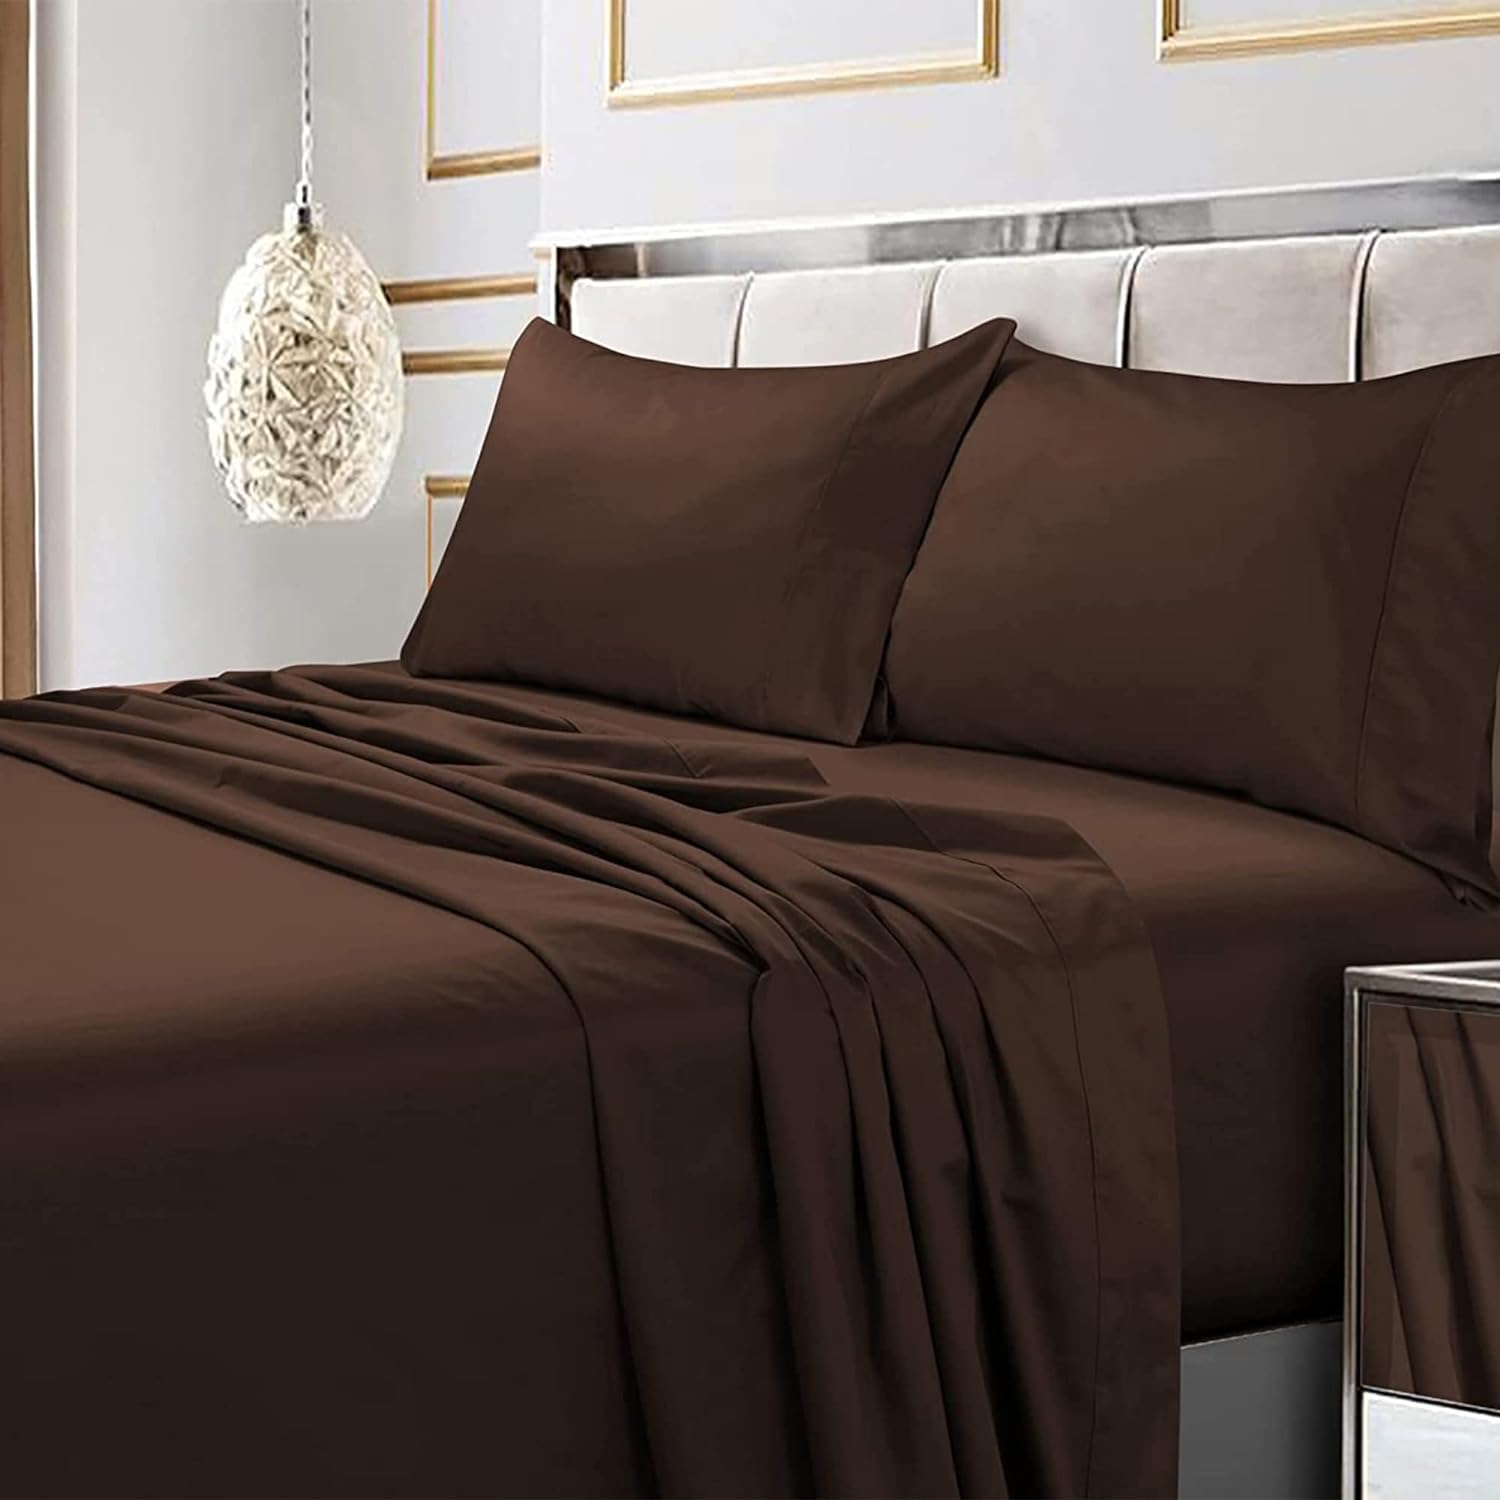 Tribeca Living Soft Egyptian Cotton Sateen Solid Pillowcase Set Extra Deep Pocket, 600 Thread Count, Bed Sheet, Cal King, Chocolate